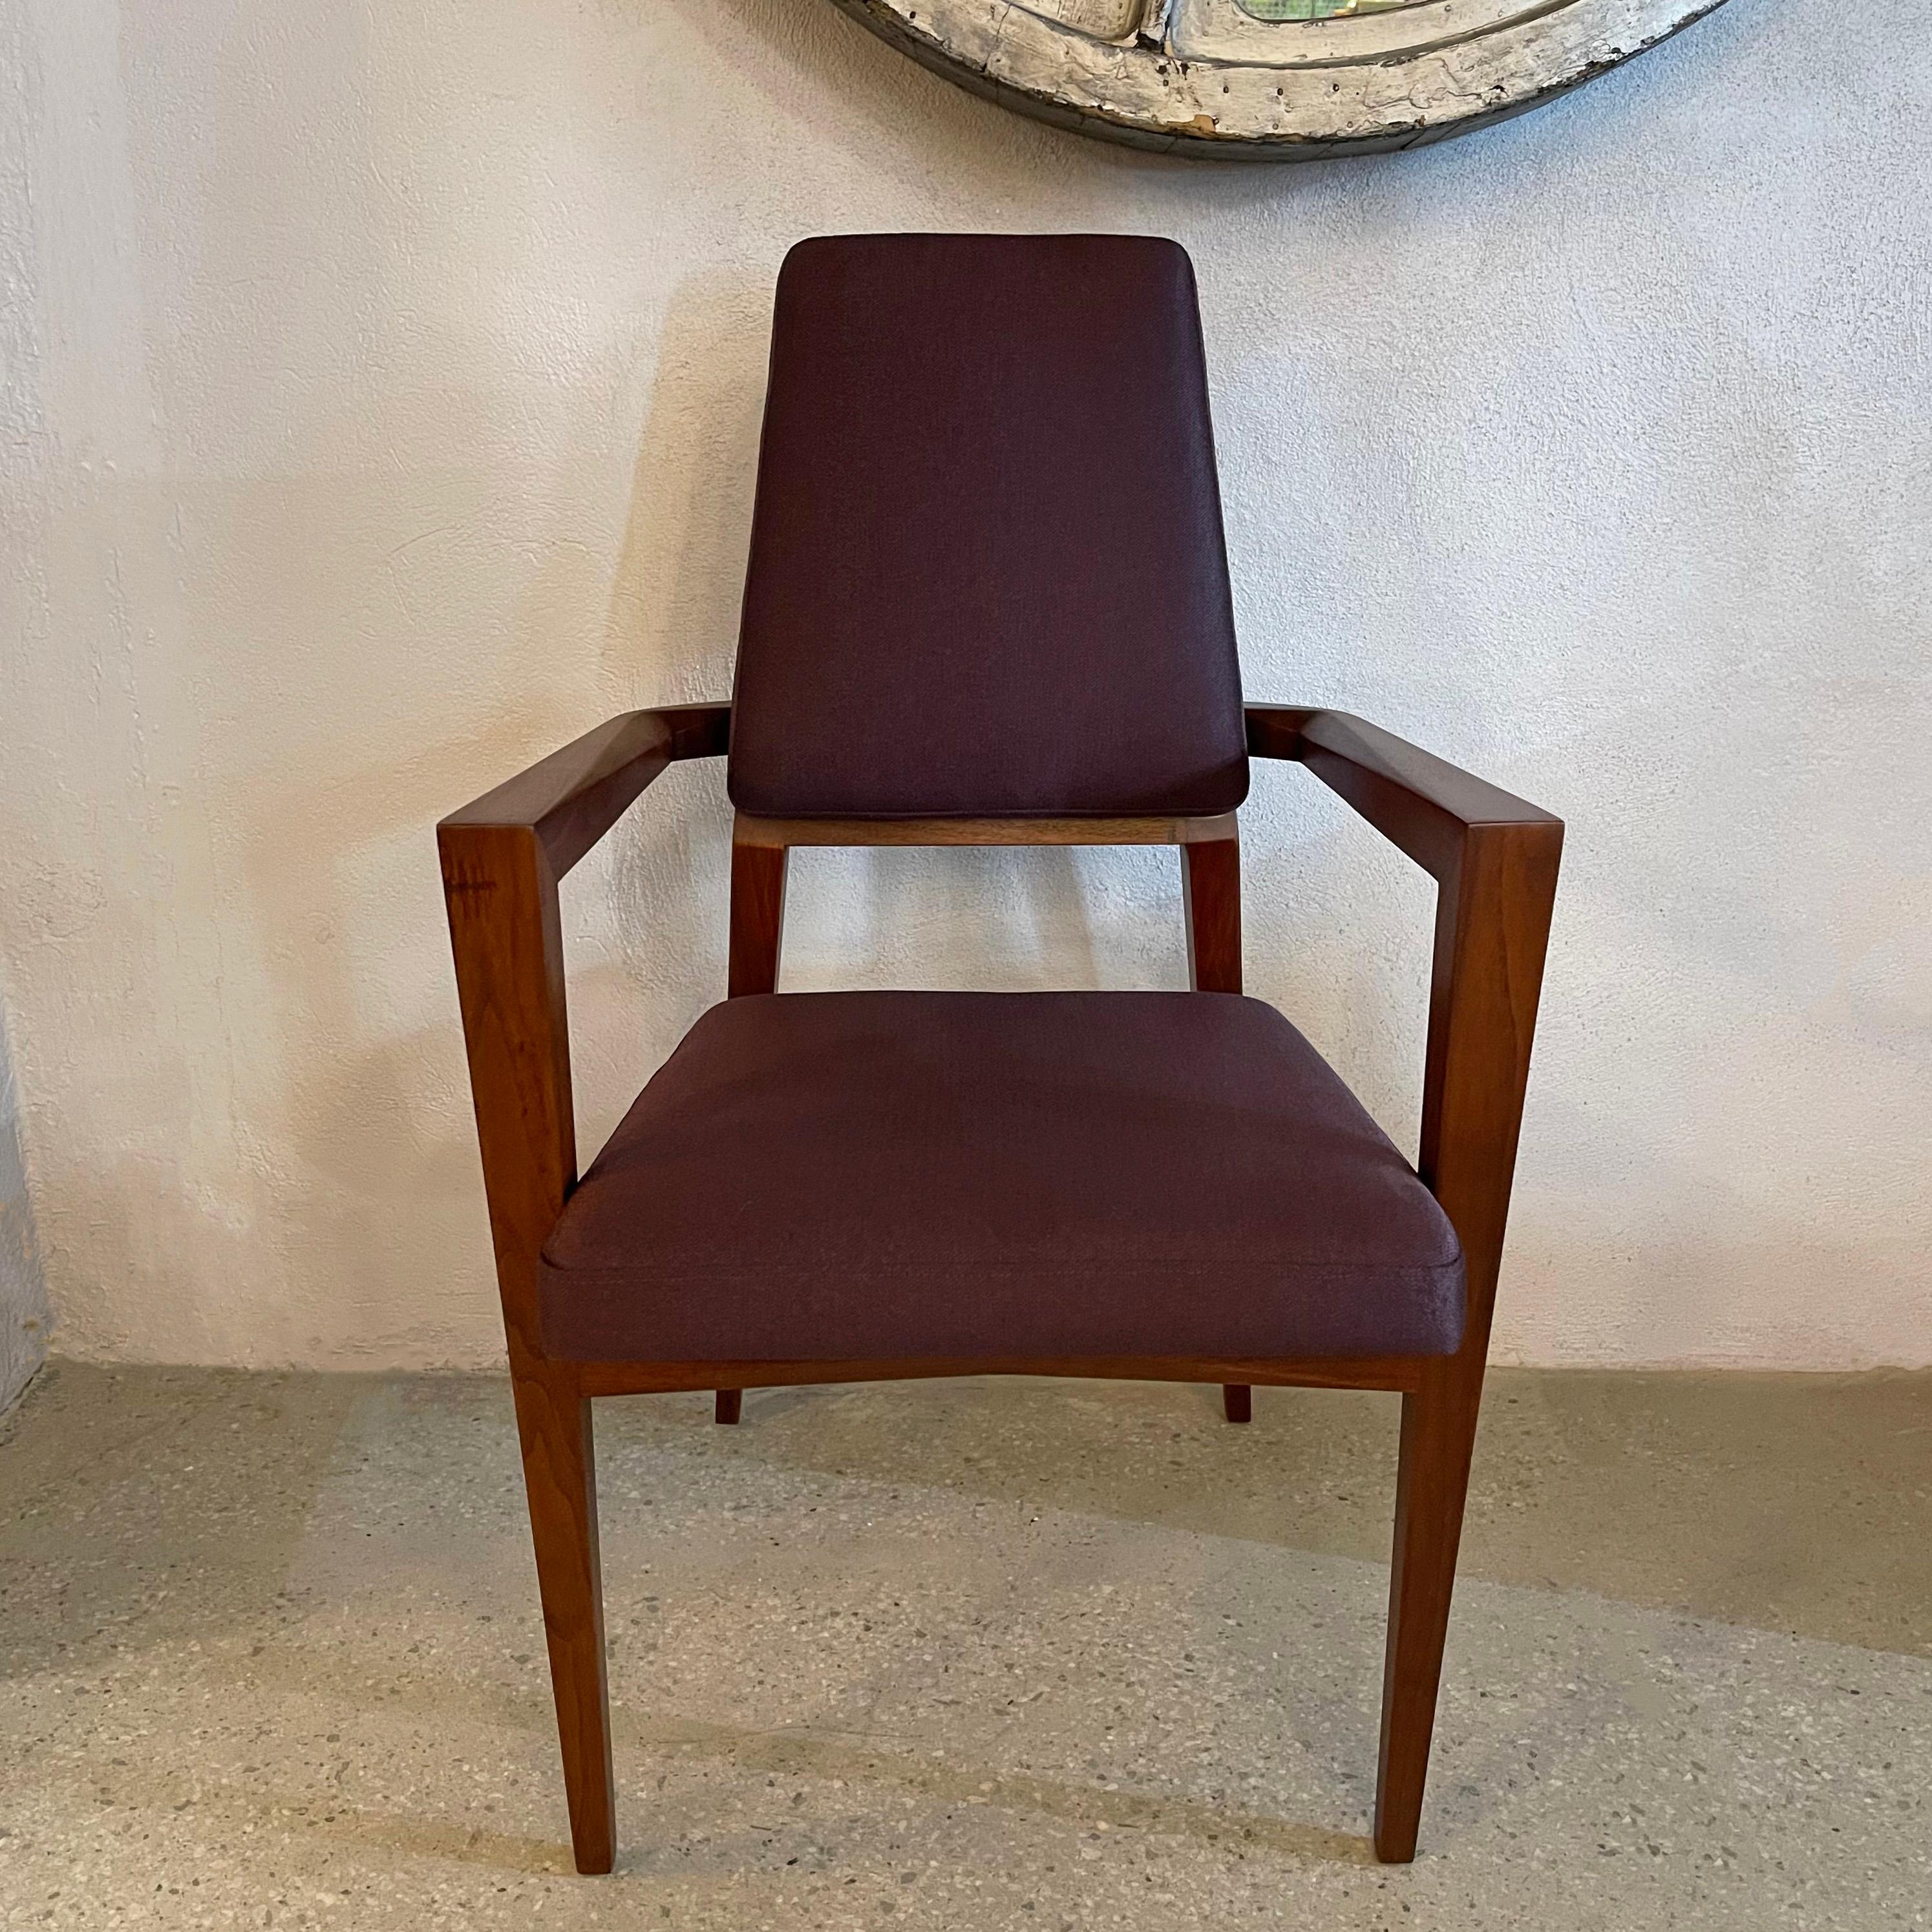 American Mid-Century Modern Sculptural Walnut Armchair by Marc Berge For Grosfeld House For Sale